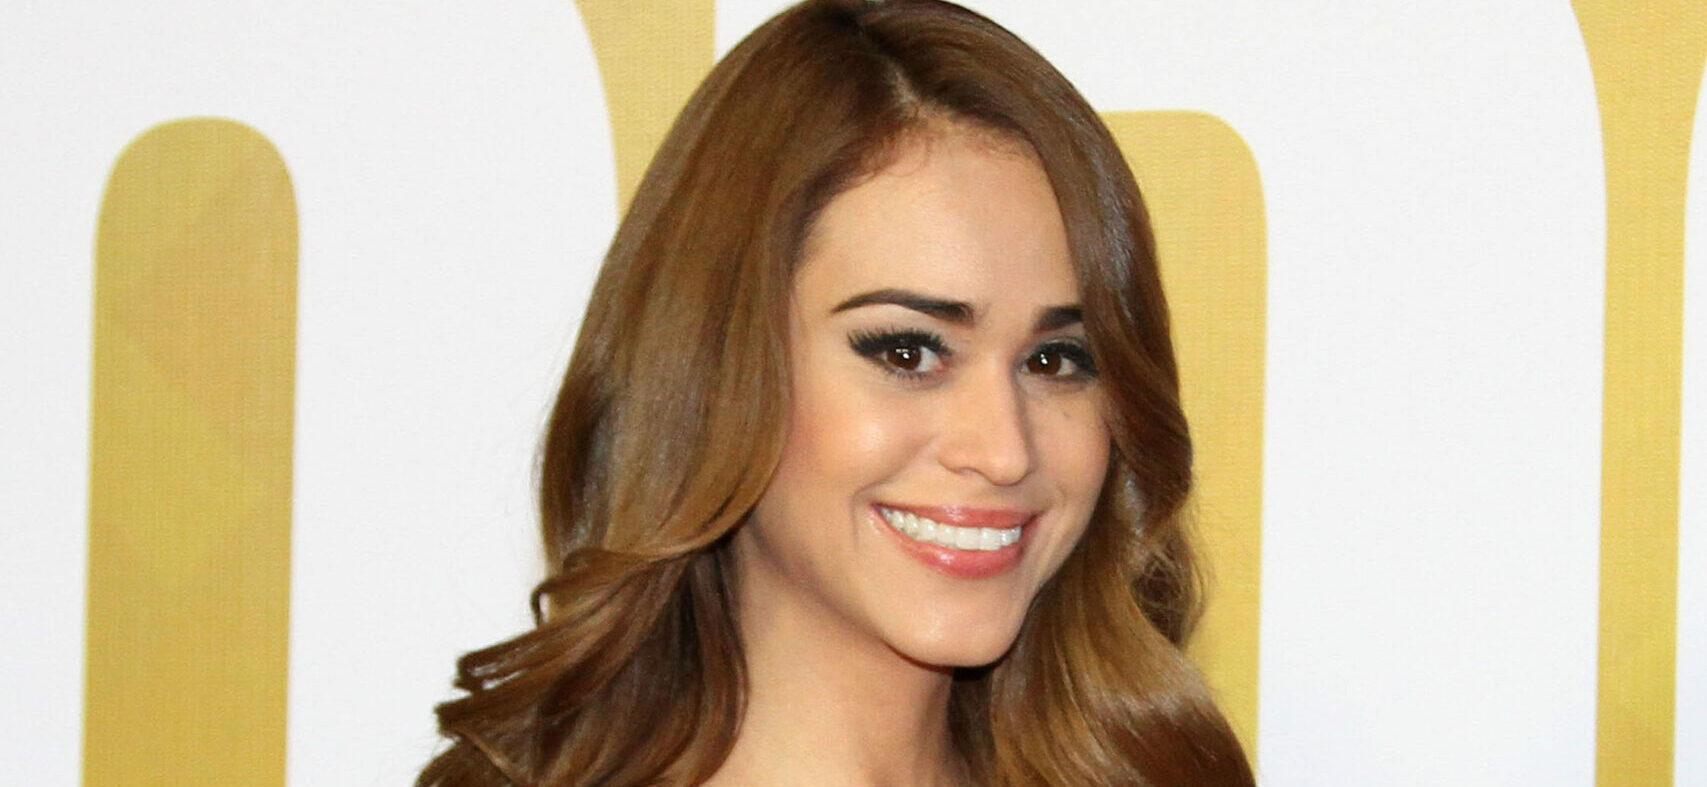 ‘World’s Sexiest Weather Girl’ Yanet Garcia Blows Instagram Away With Her CHEEKY Video!